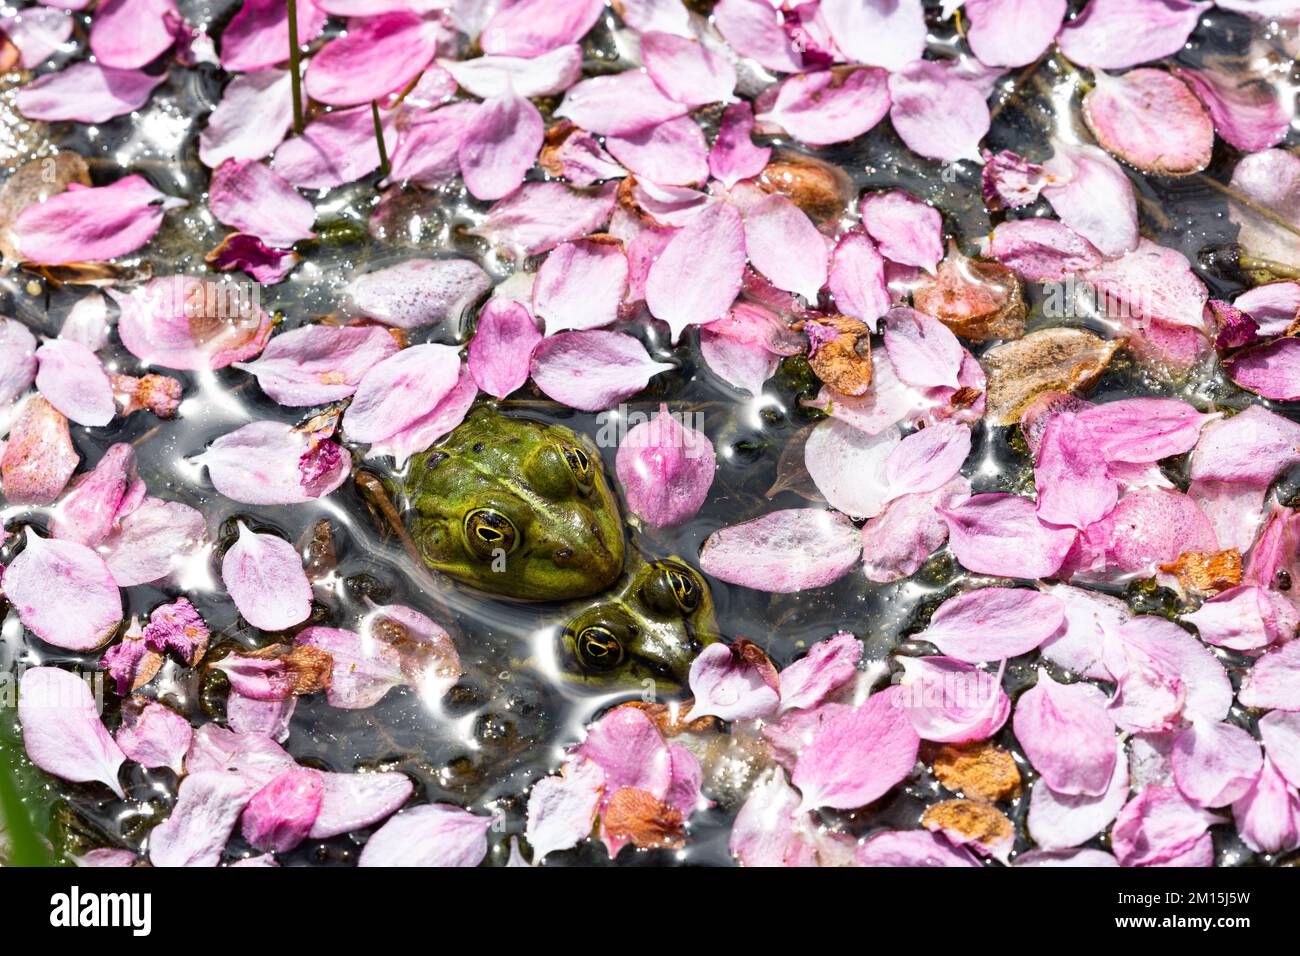 Two pond frogs squat on each other, their heads peering out from a sea of pink flower petals floating on the water of a pond. Stock Photo